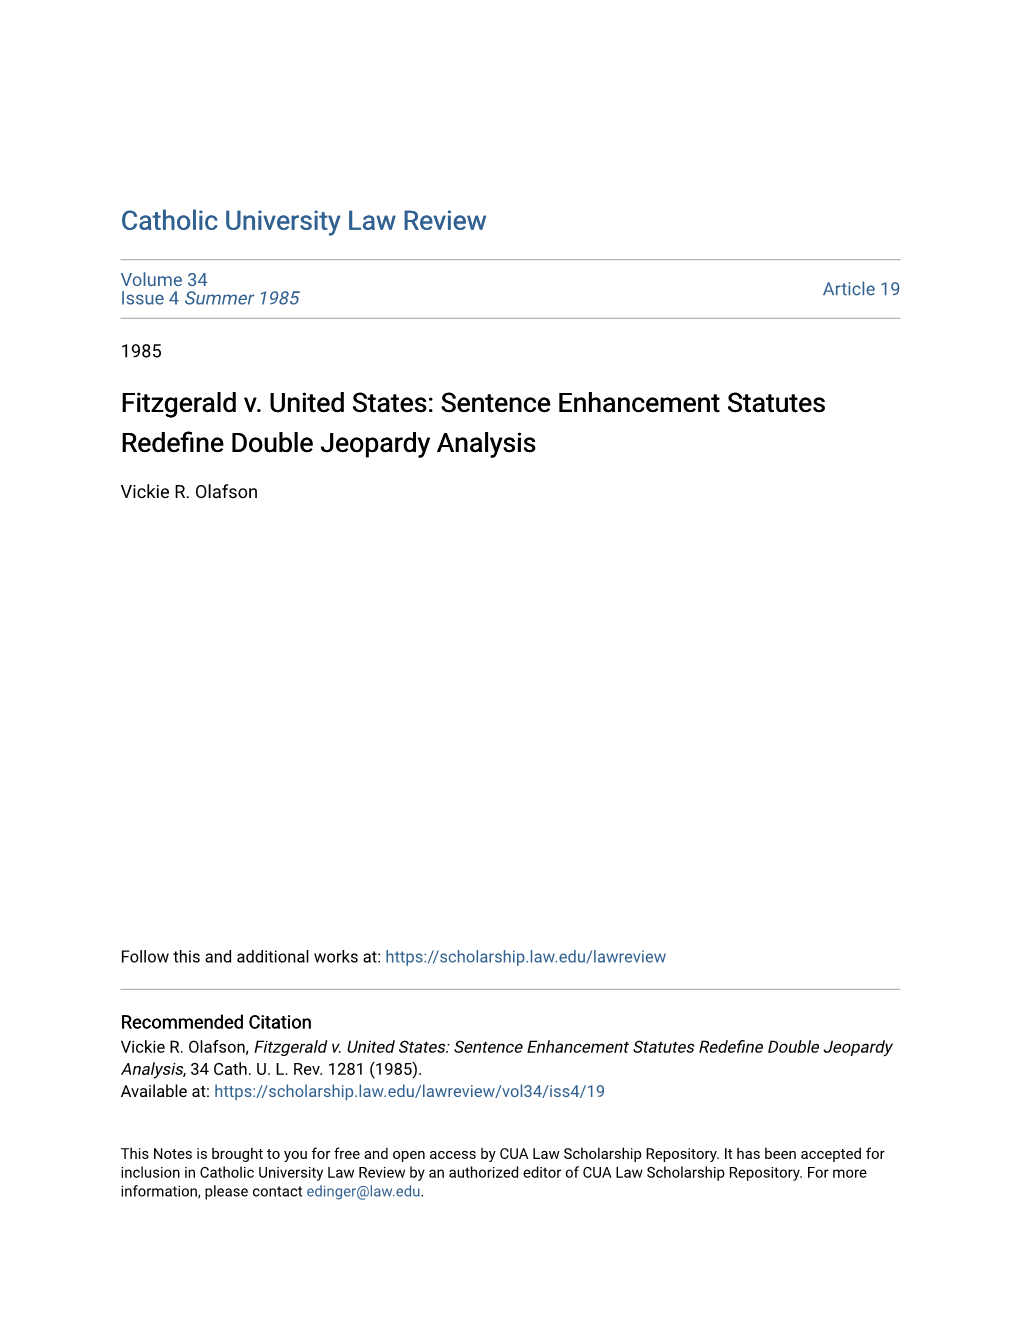 Fitzgerald V. United States: Sentence Enhancement Statutes Redefine Double Jeopardy Analysis